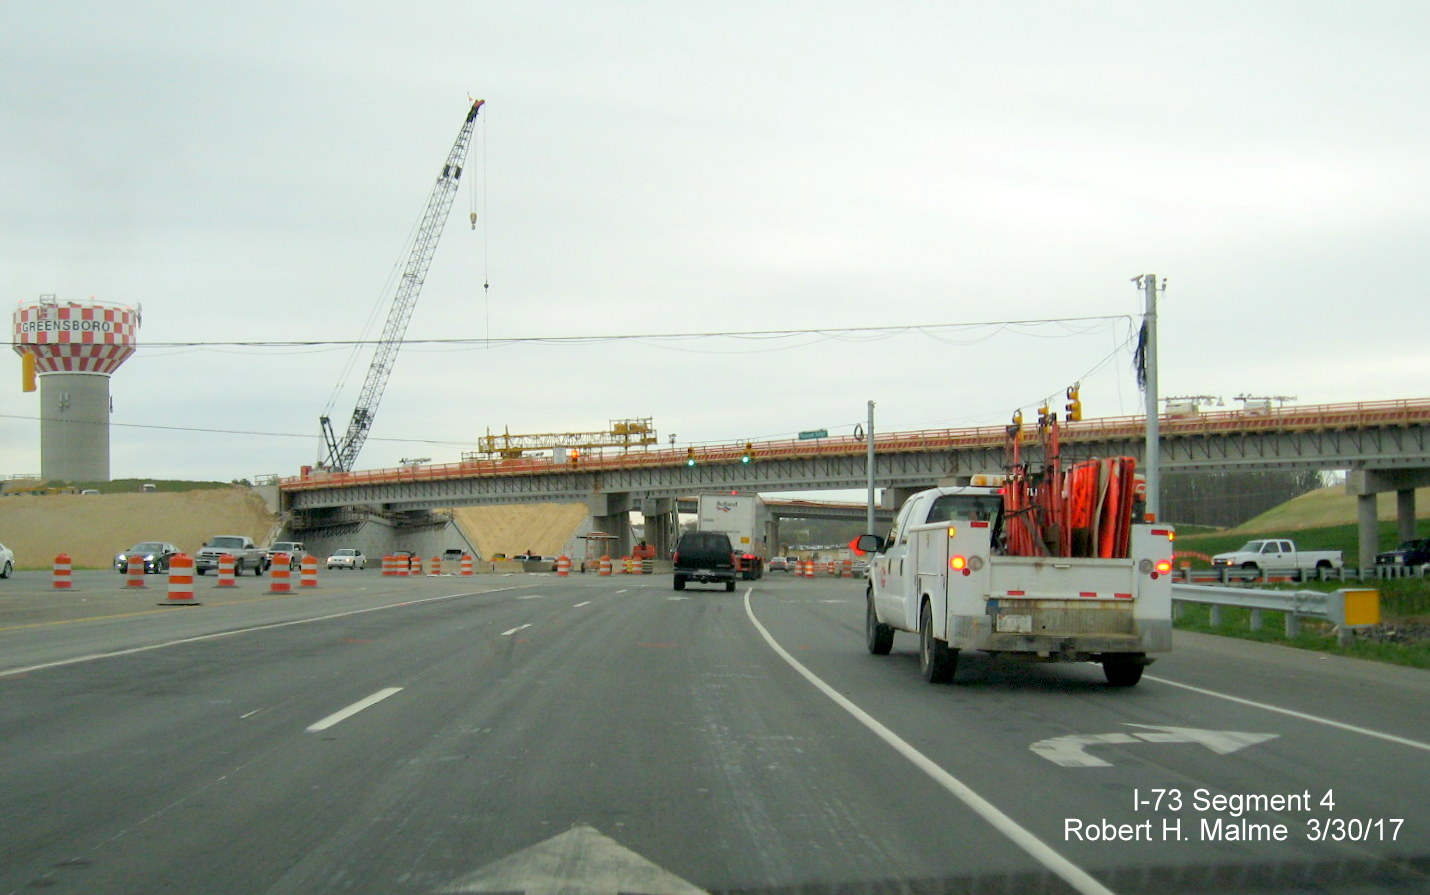 Image showing construction of future I-73 lane bridges south of intersection of Pleasant Ridge Rd and NC 68 in Greensboro